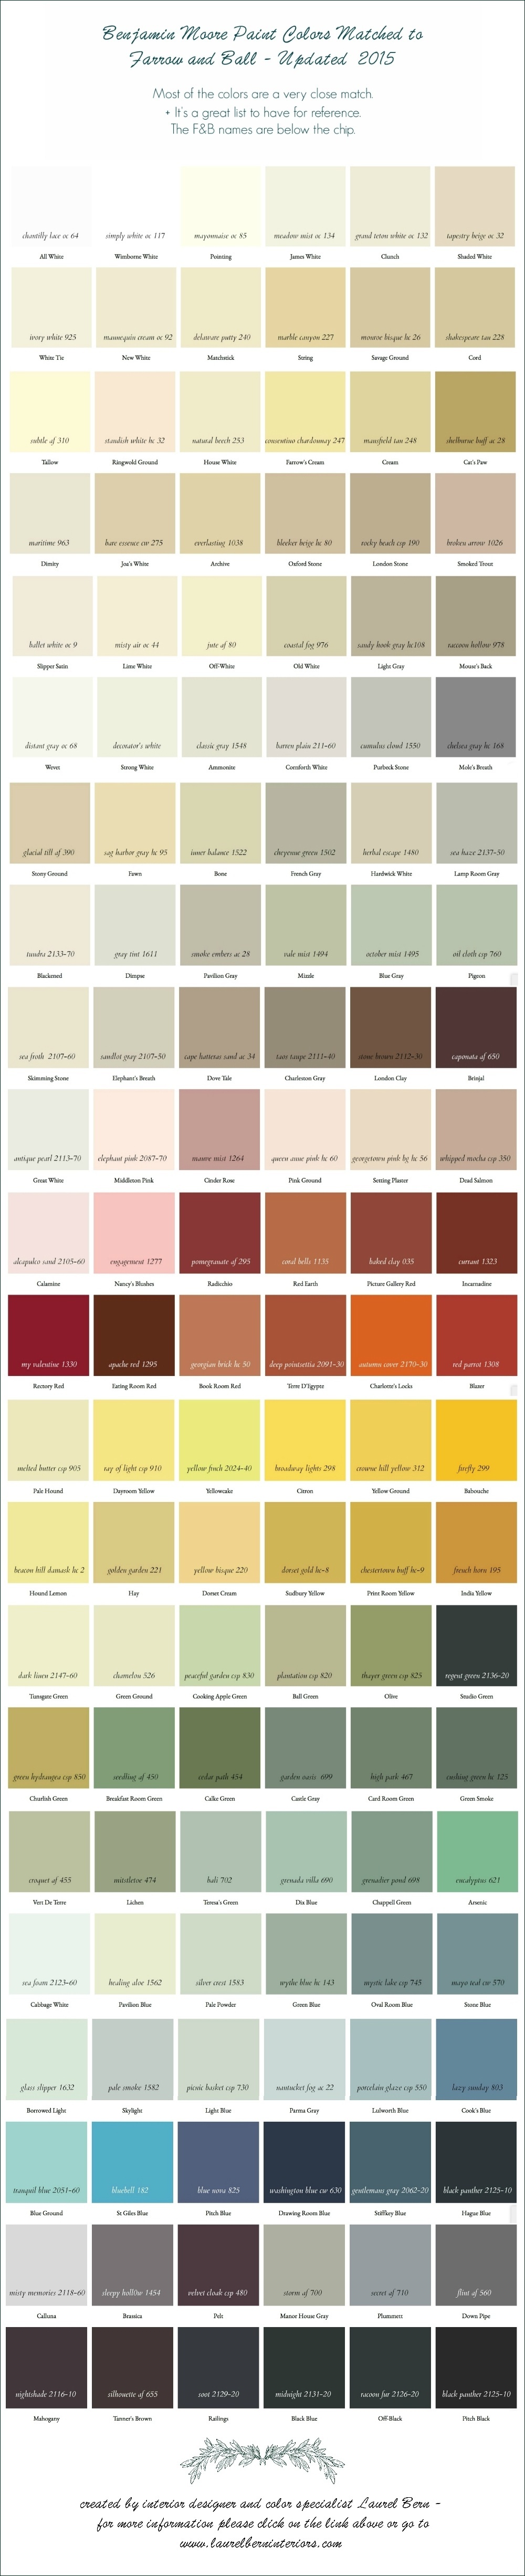 Benjamin Moore Paint Colors Matched To Farrow & Ball 2015